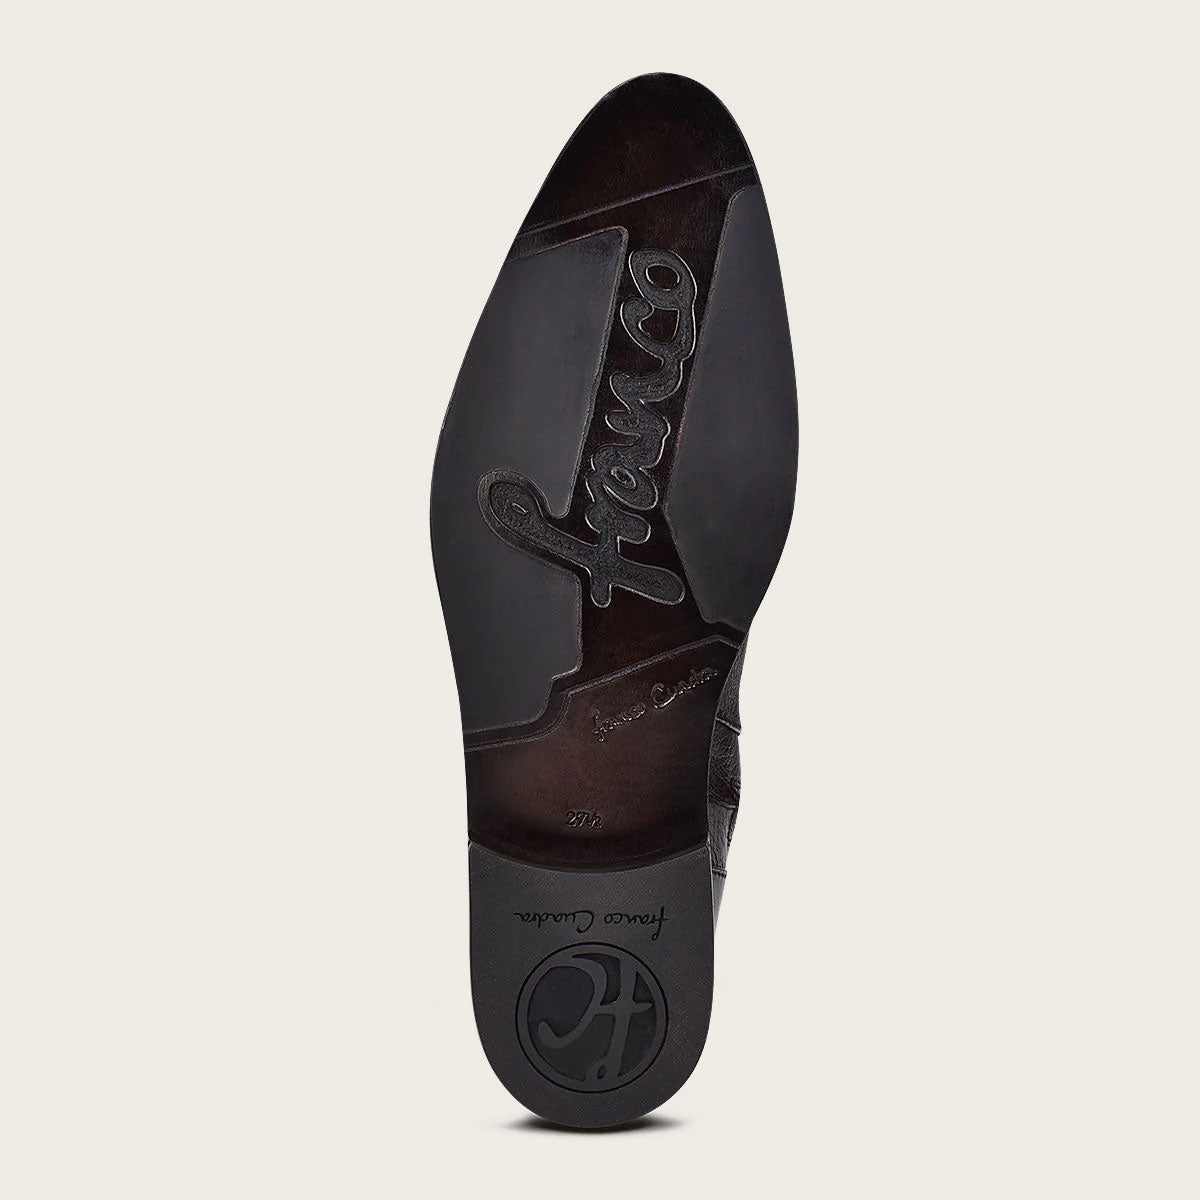 Allowing it to conform to the unique shape of your foot. This lightweight and elegant leather gives unparalleled comfort, making every step a delight.